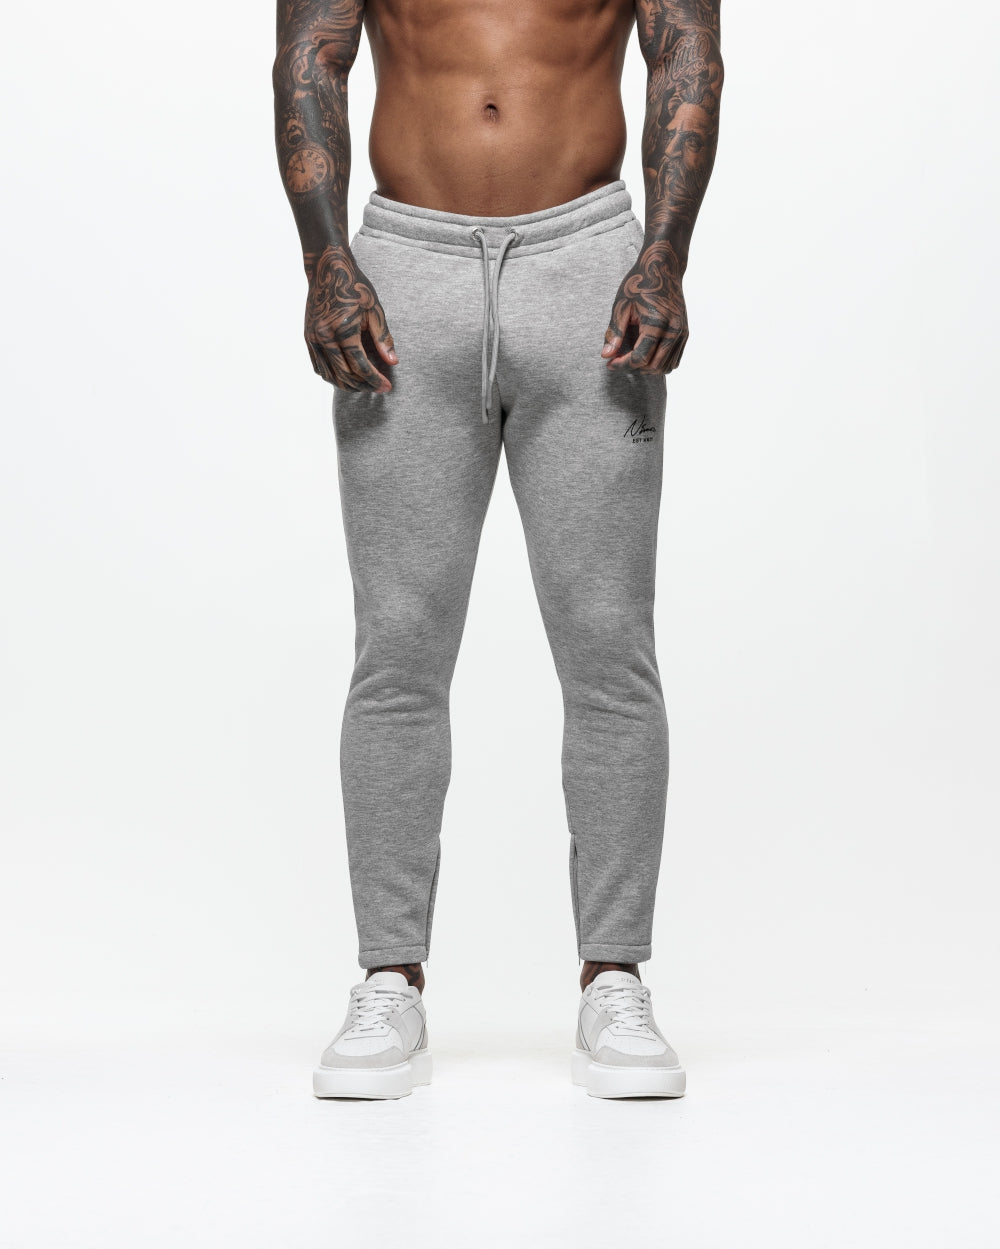 Relaxed Fit Sweatpants - Grey marl - Men